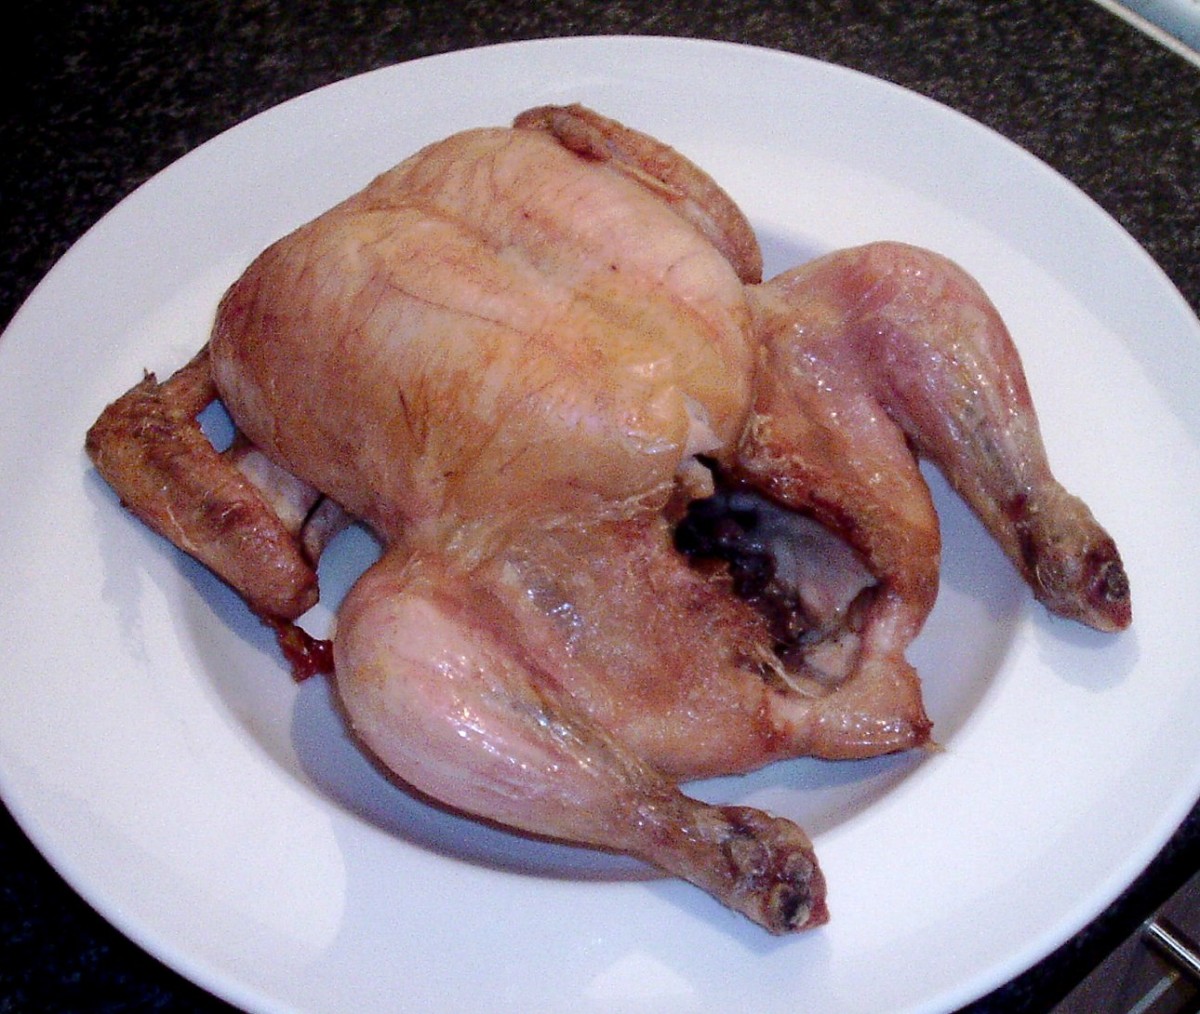 Roast chicken removed from the oven